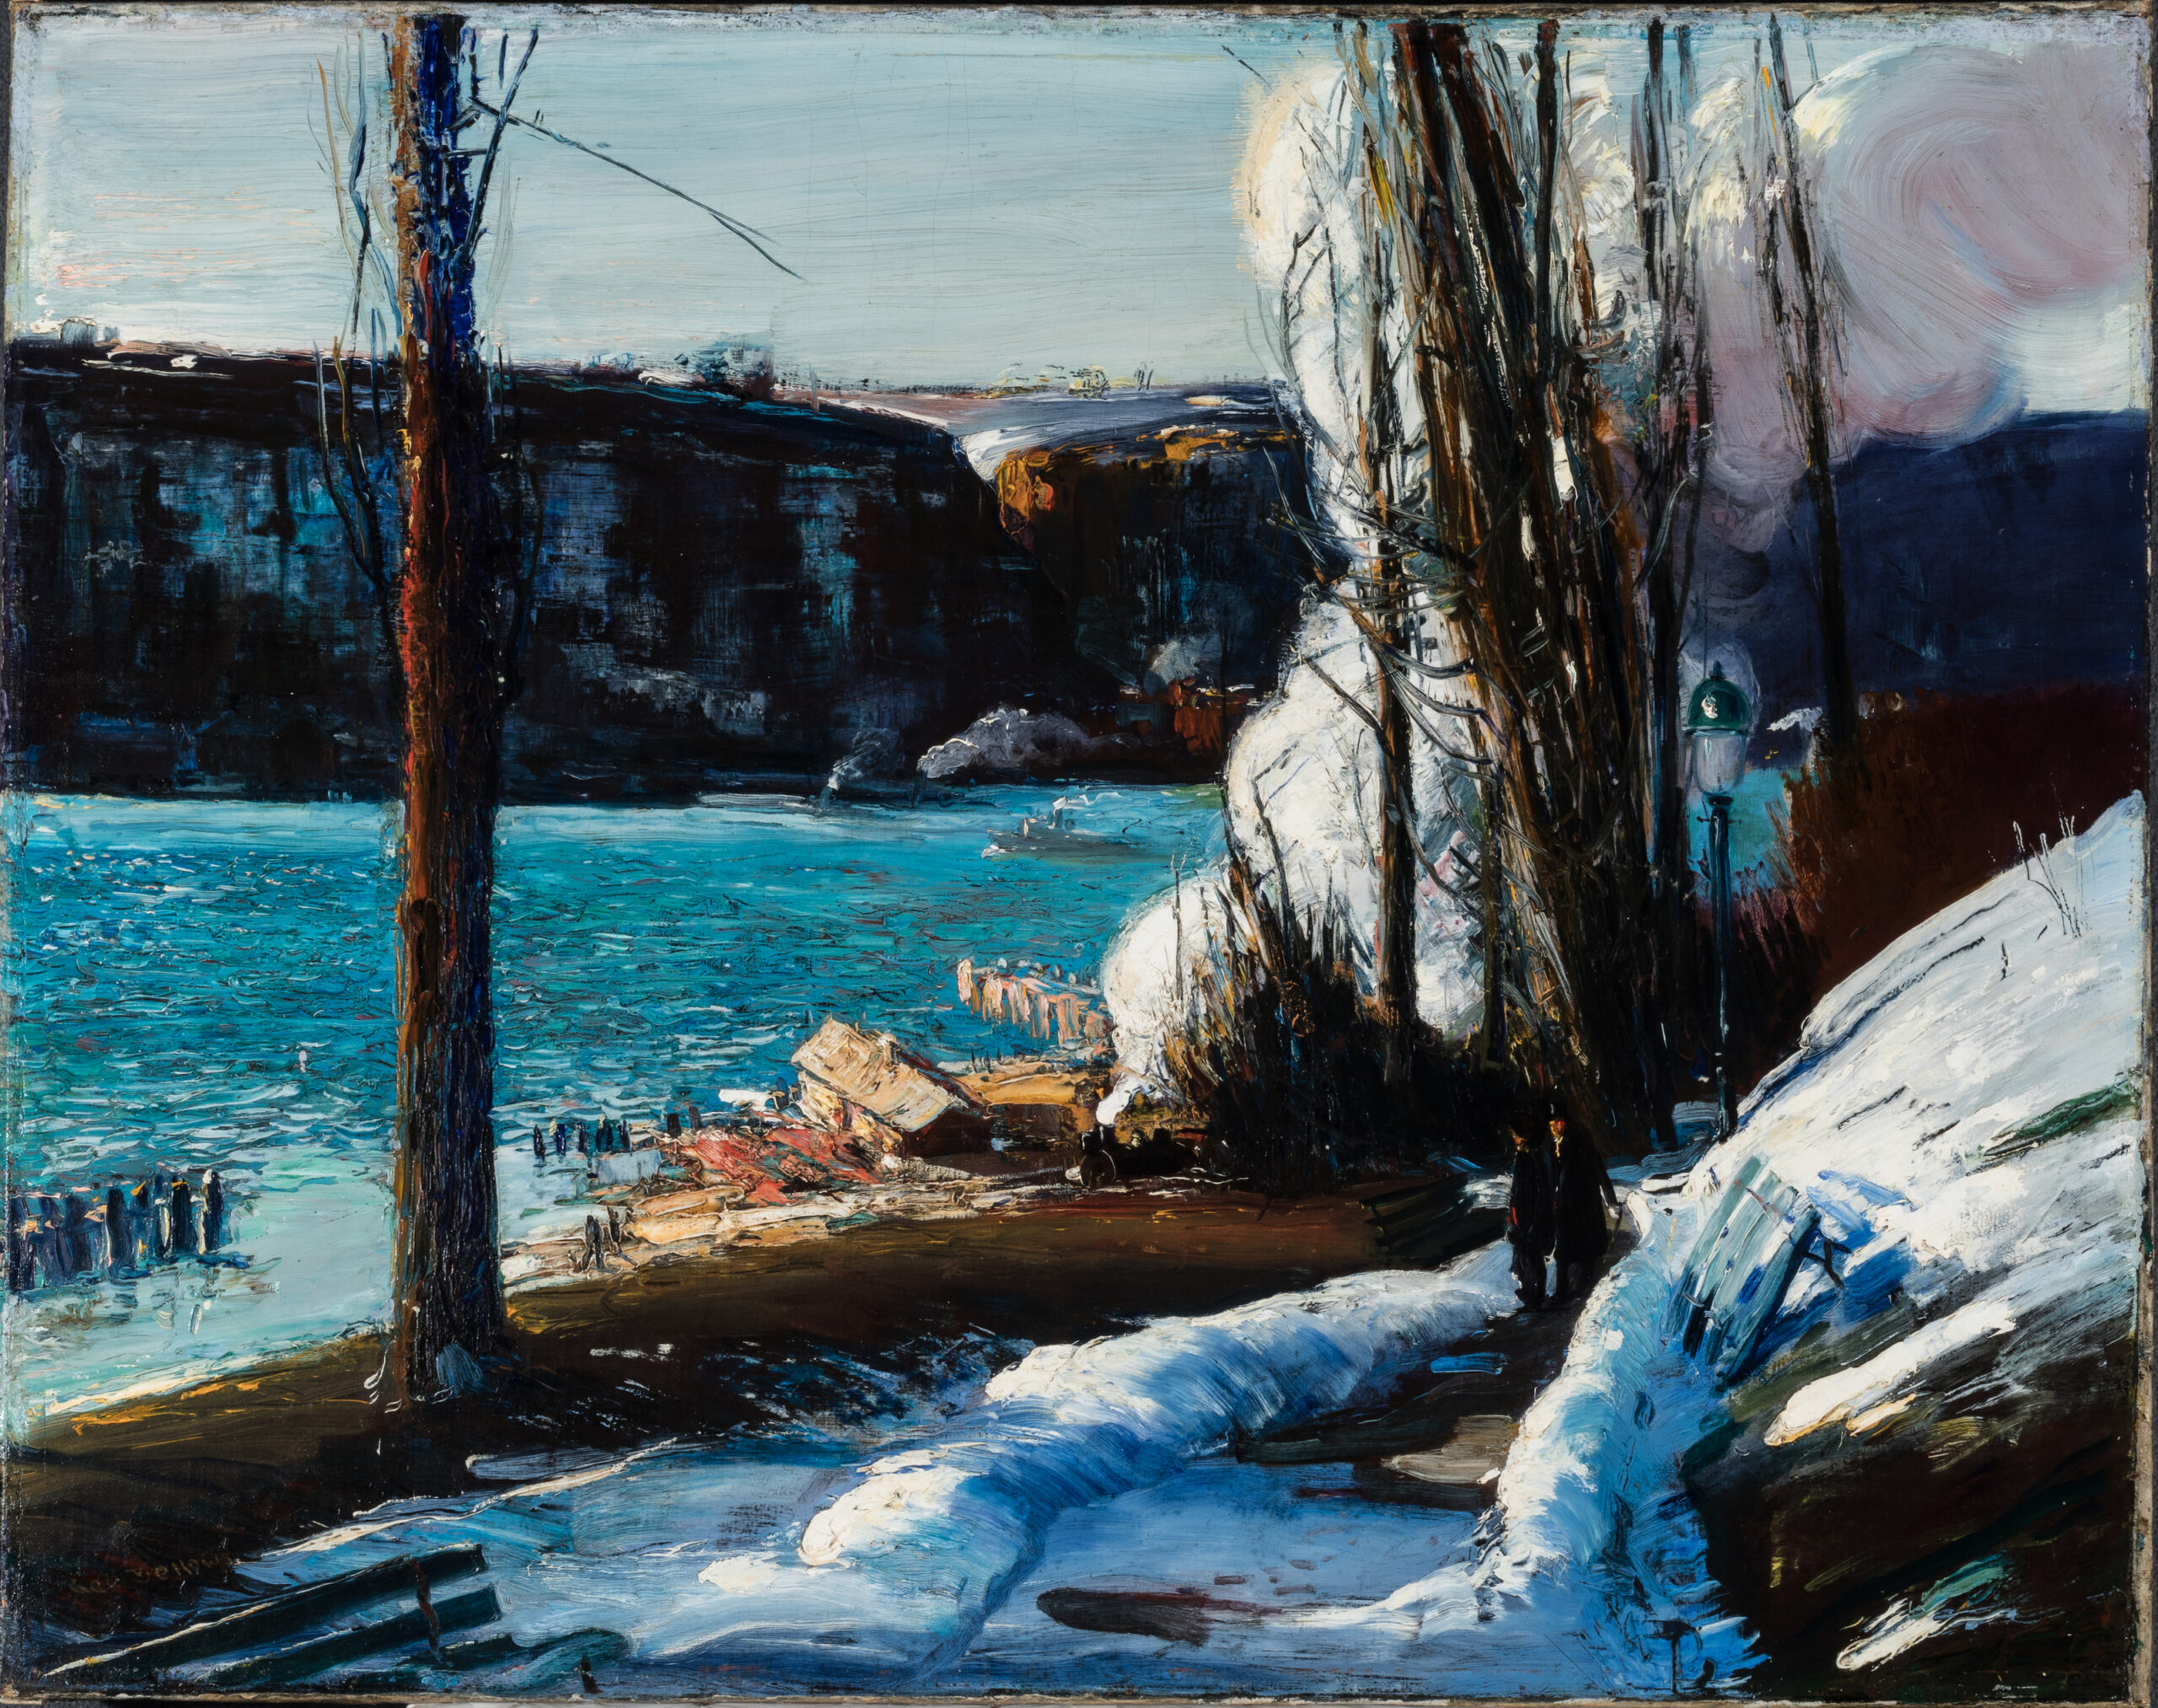 Painting of the Hudson River in wintertime from the west side of Manhattan Island in New York City. It is framed by tall trees, the scene looks west across the river toward the cliffs known as the Palisades, in New Jersey. White, patchy snow is echoed by the powerful plume of steam billowing from the funnel of a southbound locomotive.